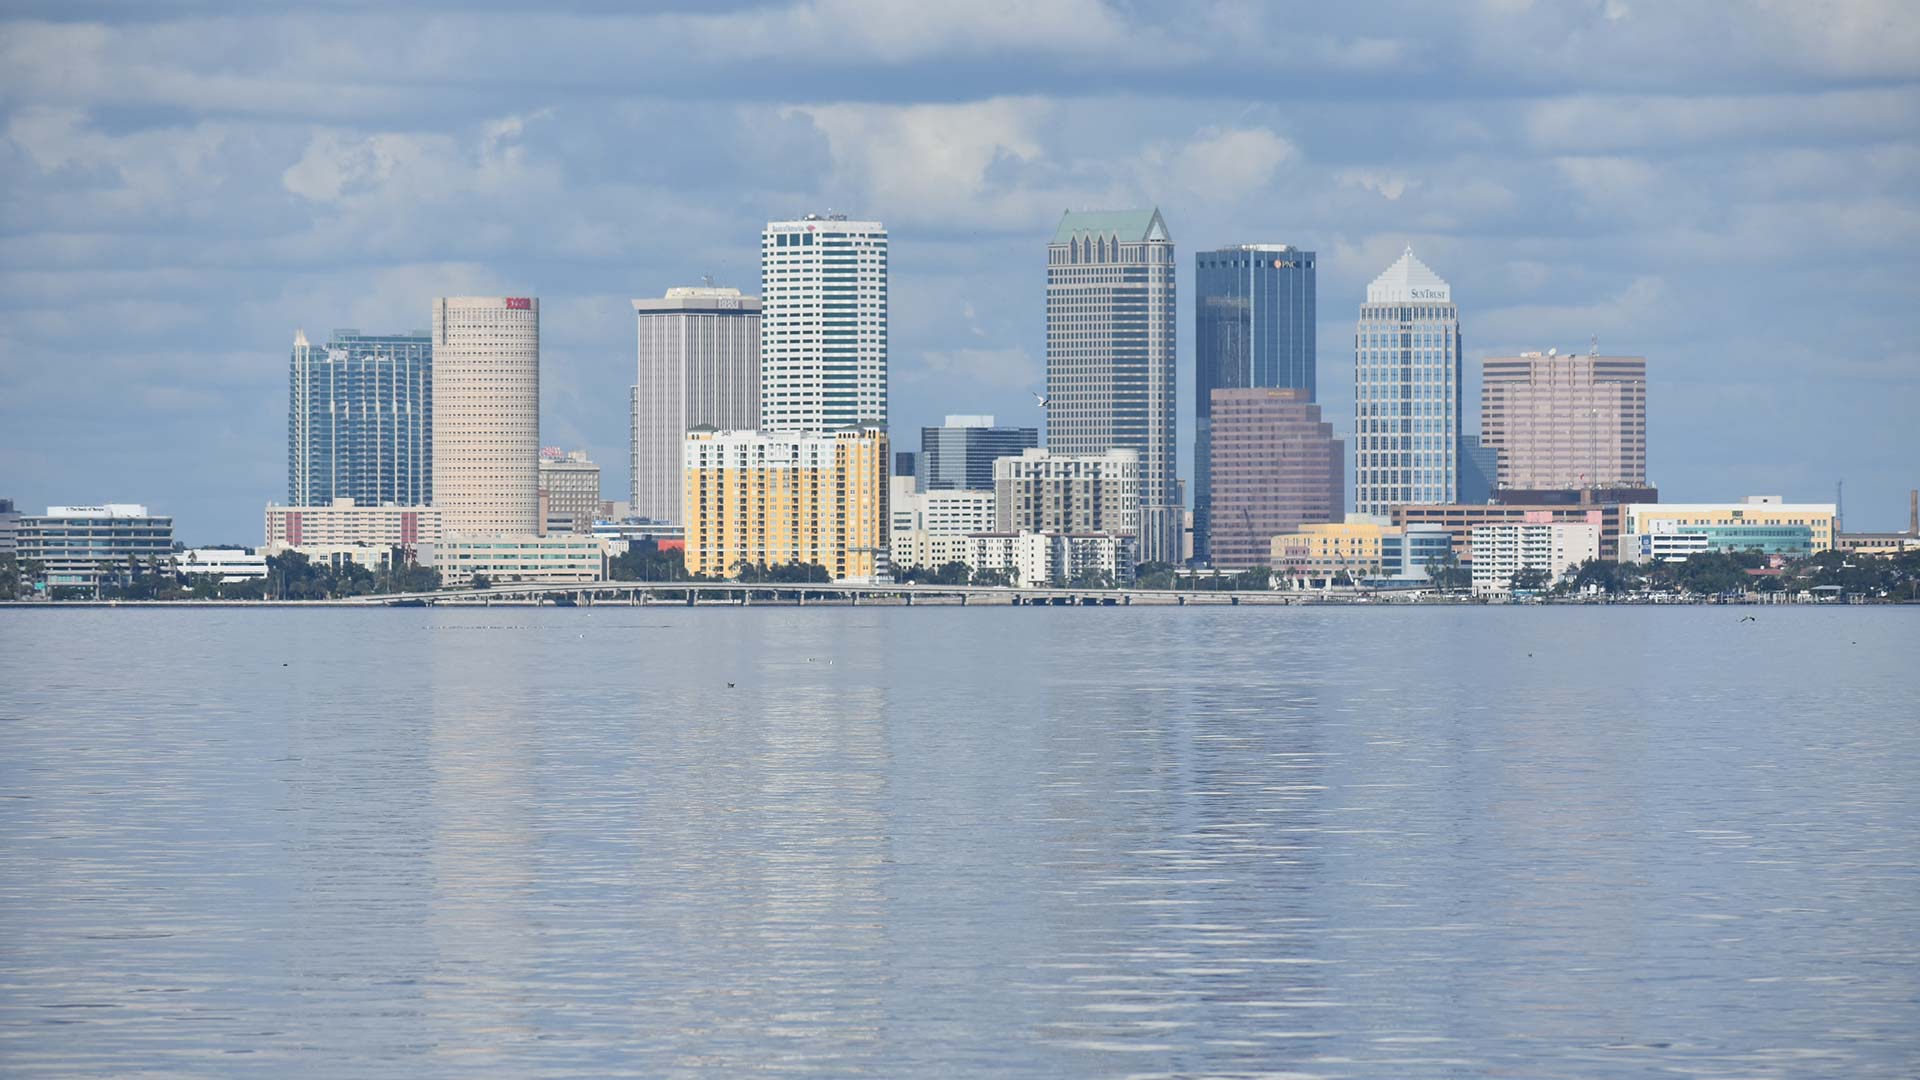 Tampa city skyline view from Tampa Bay, Florida.